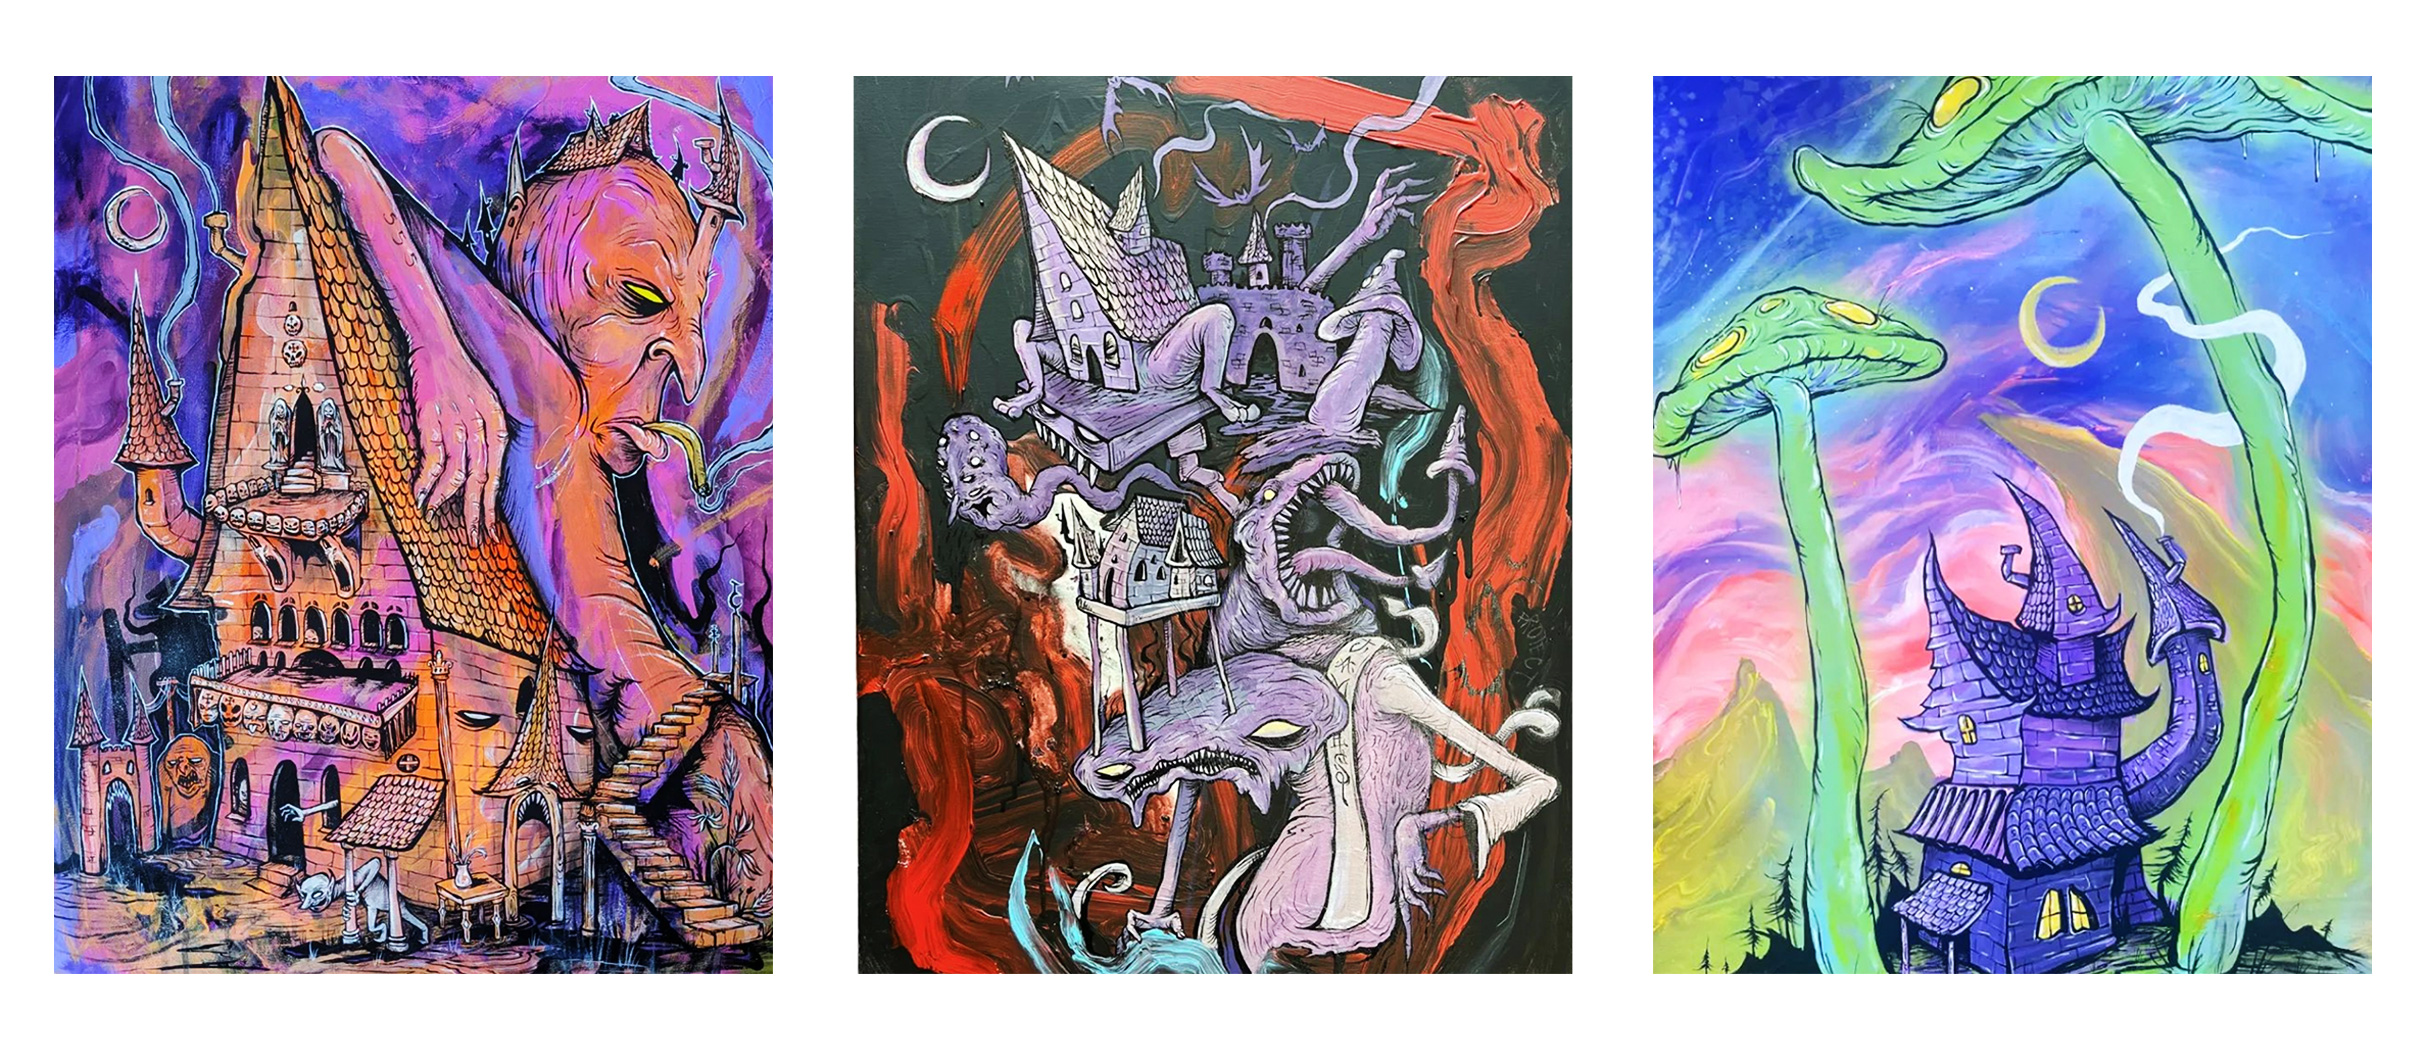 Three Awesome Images from KaterTheAlchemist Now thru September